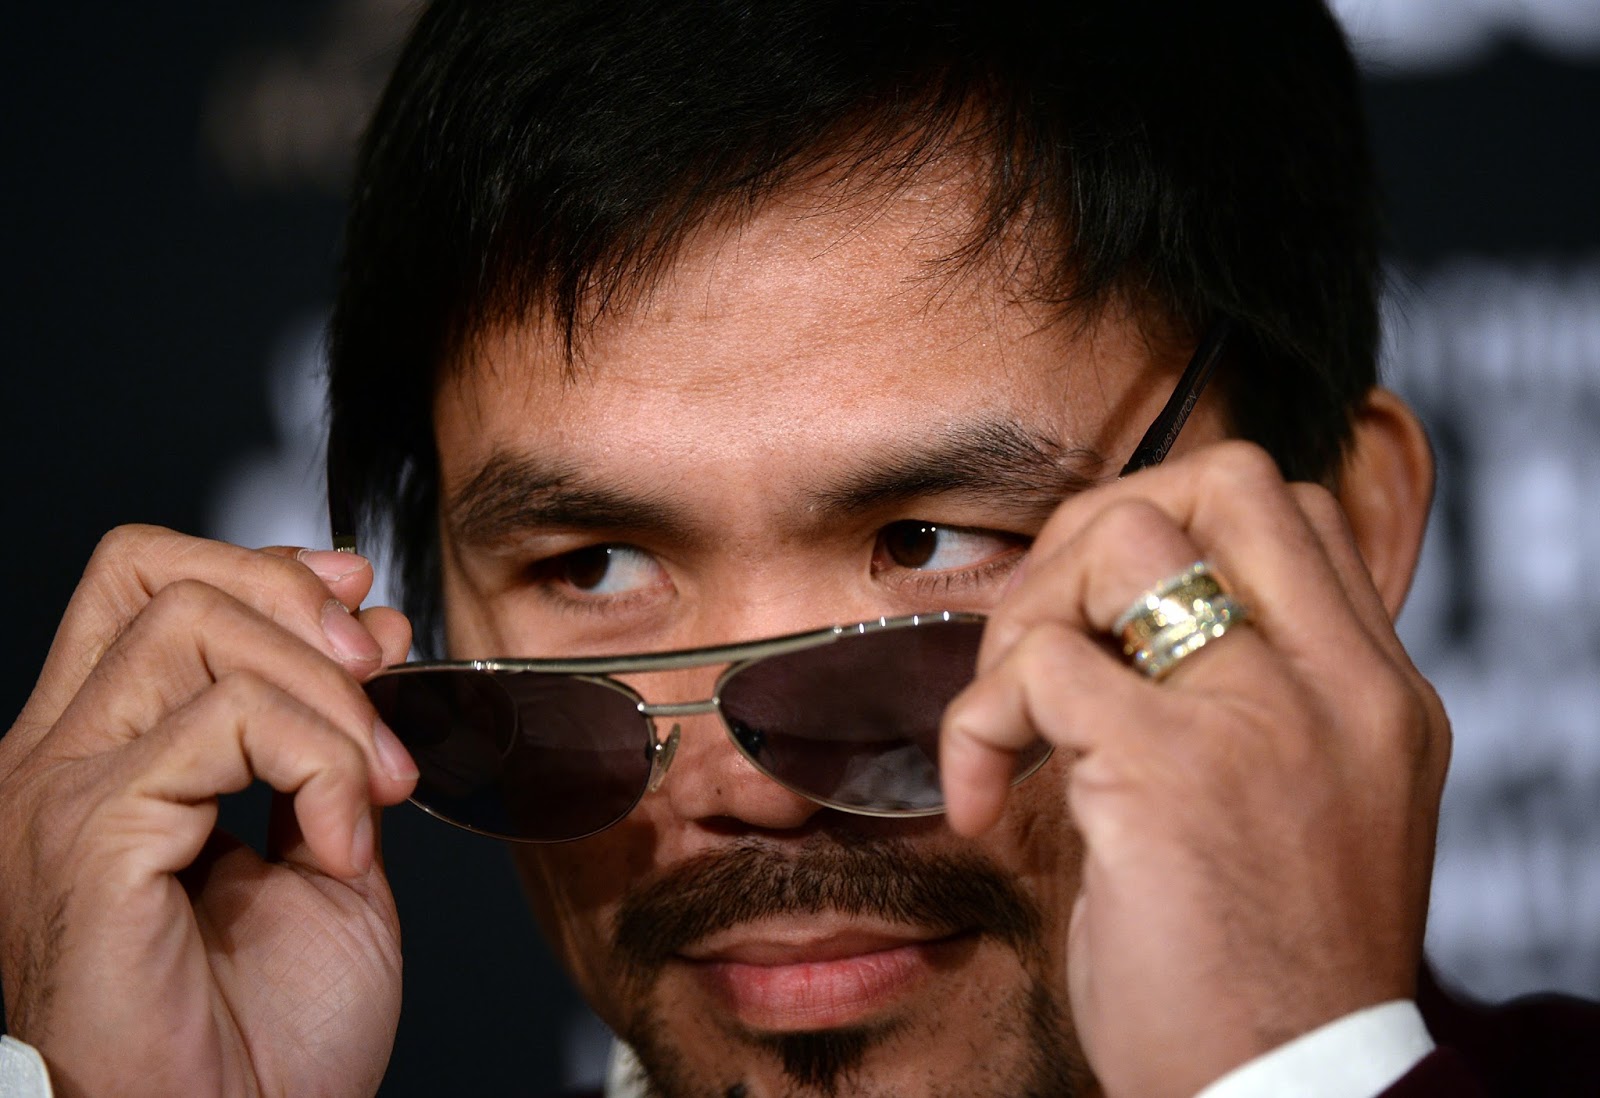 Boxing News: Manny Pacquiao: "The fight with Ugas may be the last in my career"